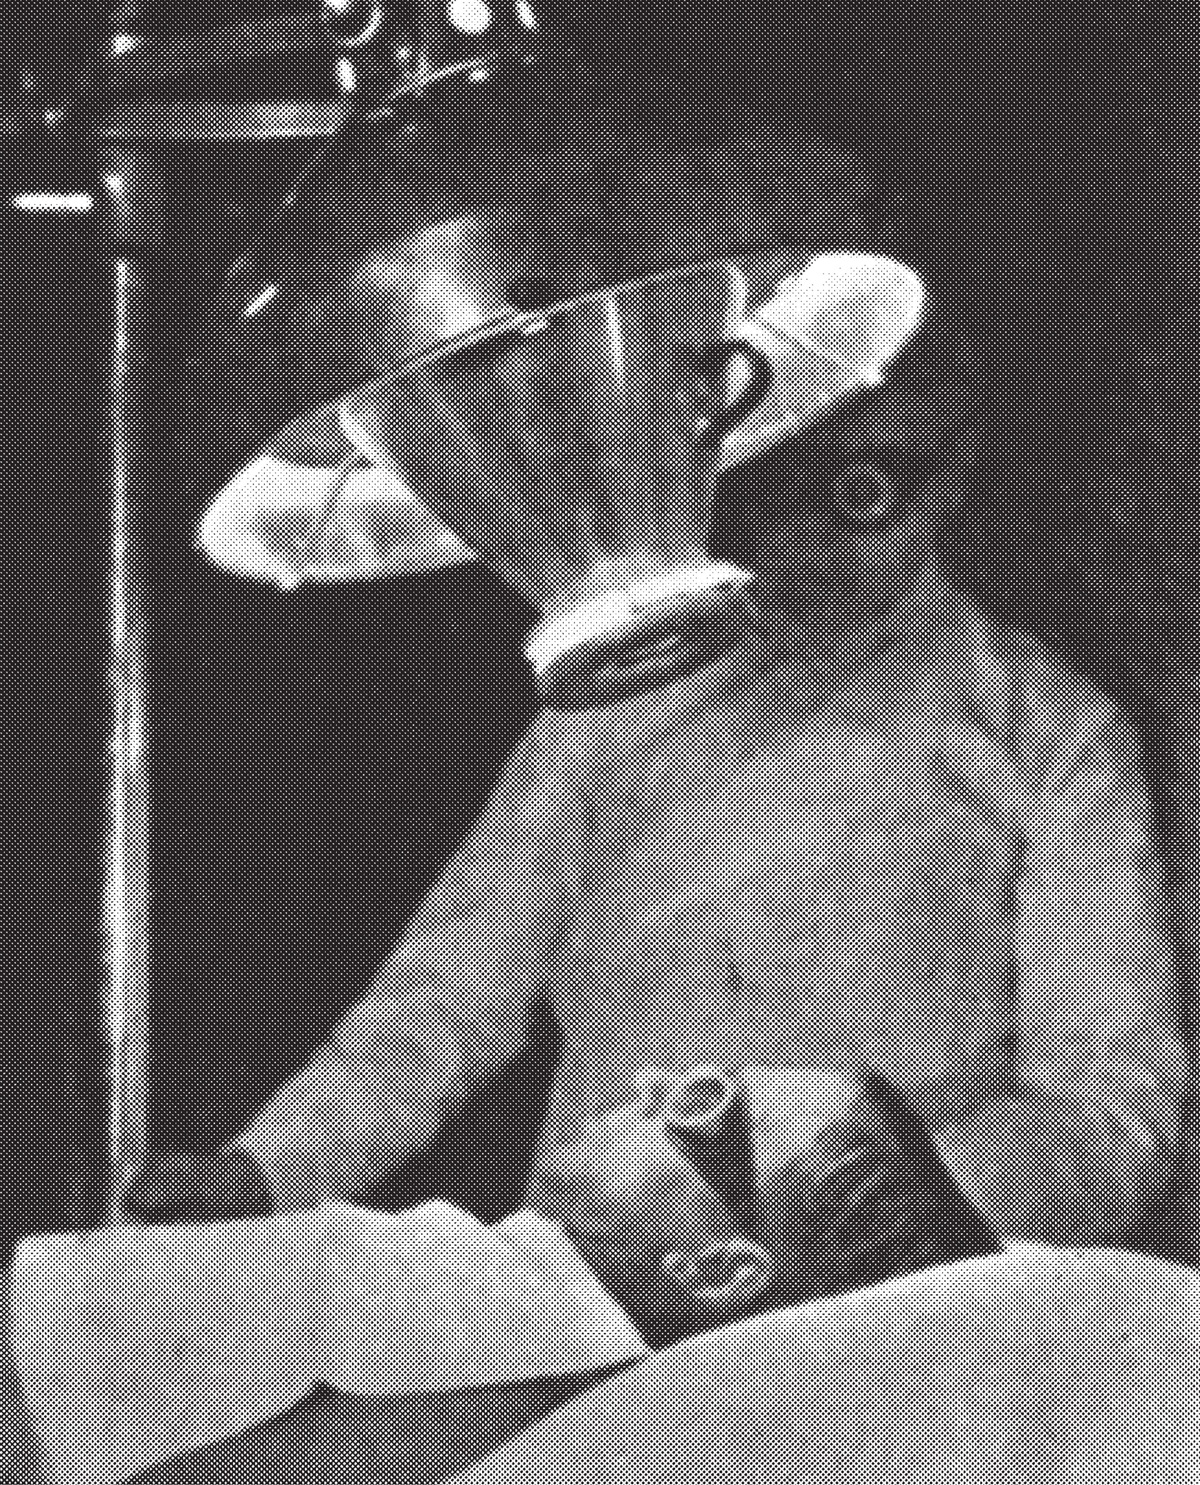 A photograph from a 1938 manual showing chromo-therapy in action using a “Kromayer” light. 